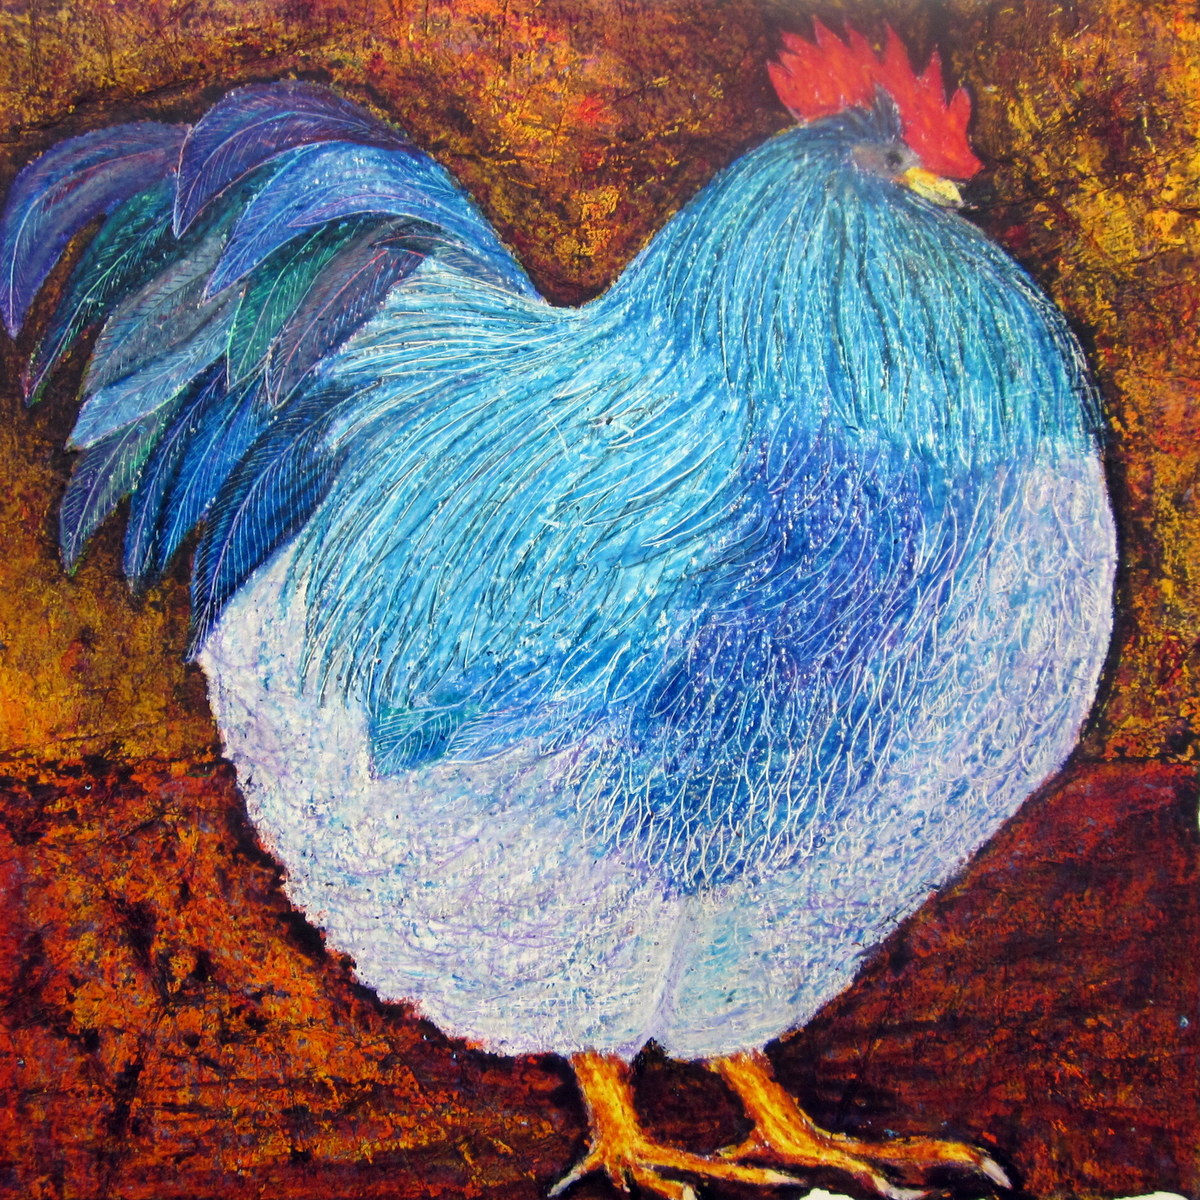 Vibrant paintings of hens, cockerels, roosters, chickens